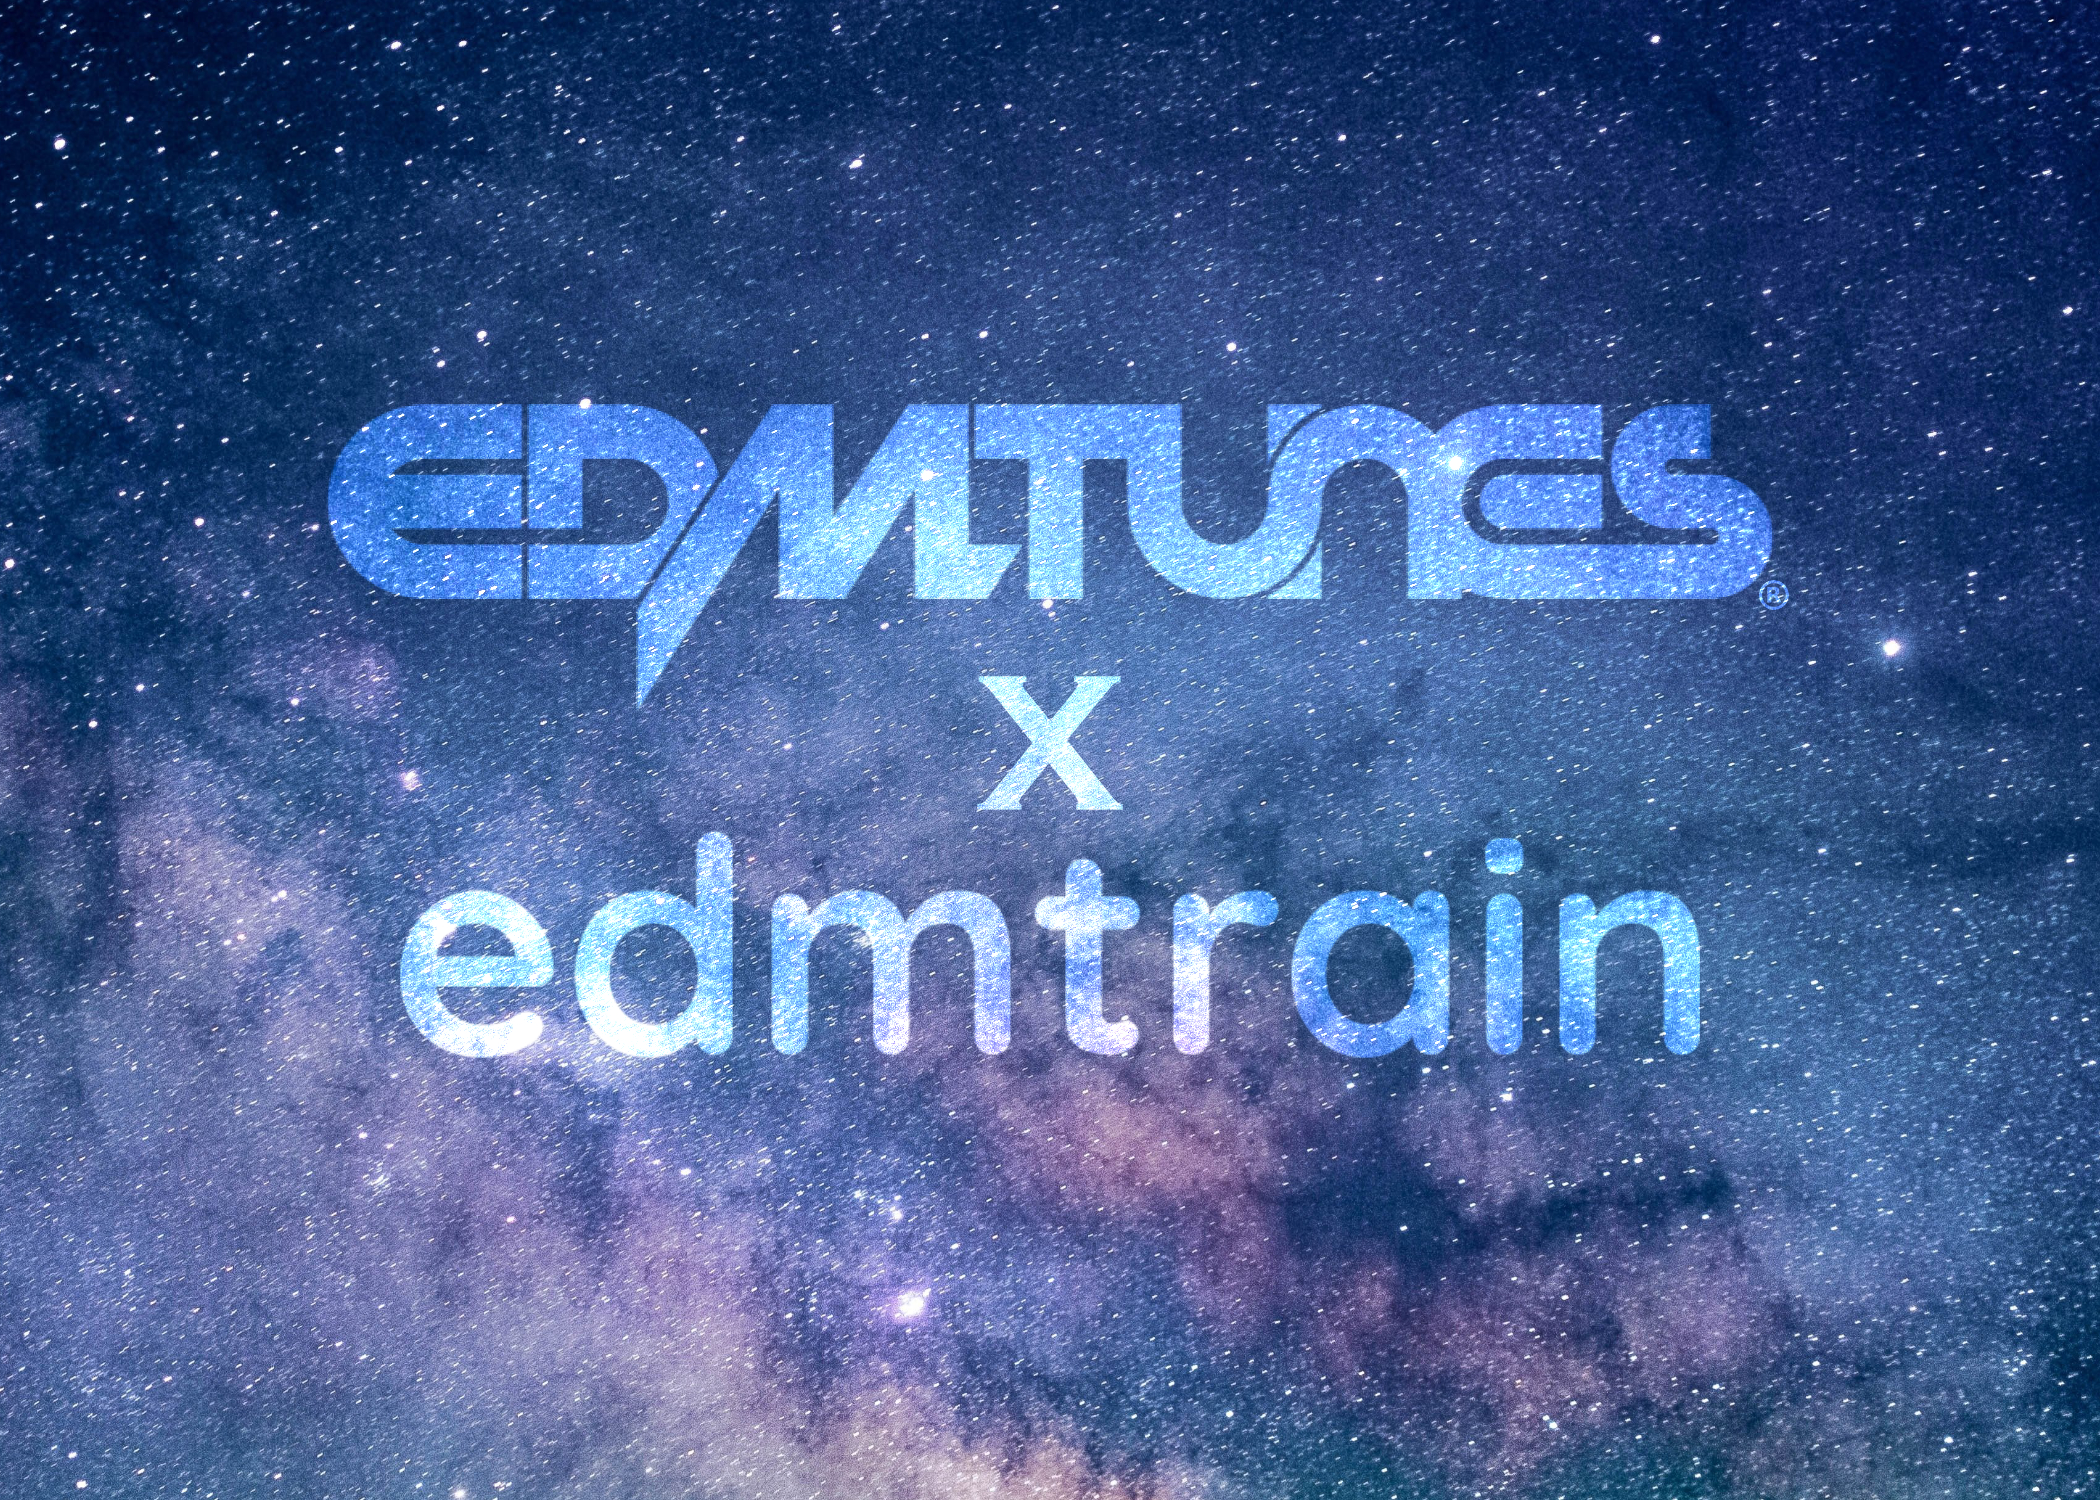 Edmtrain x EDMTunes Helps You Find EDM Events in Your City